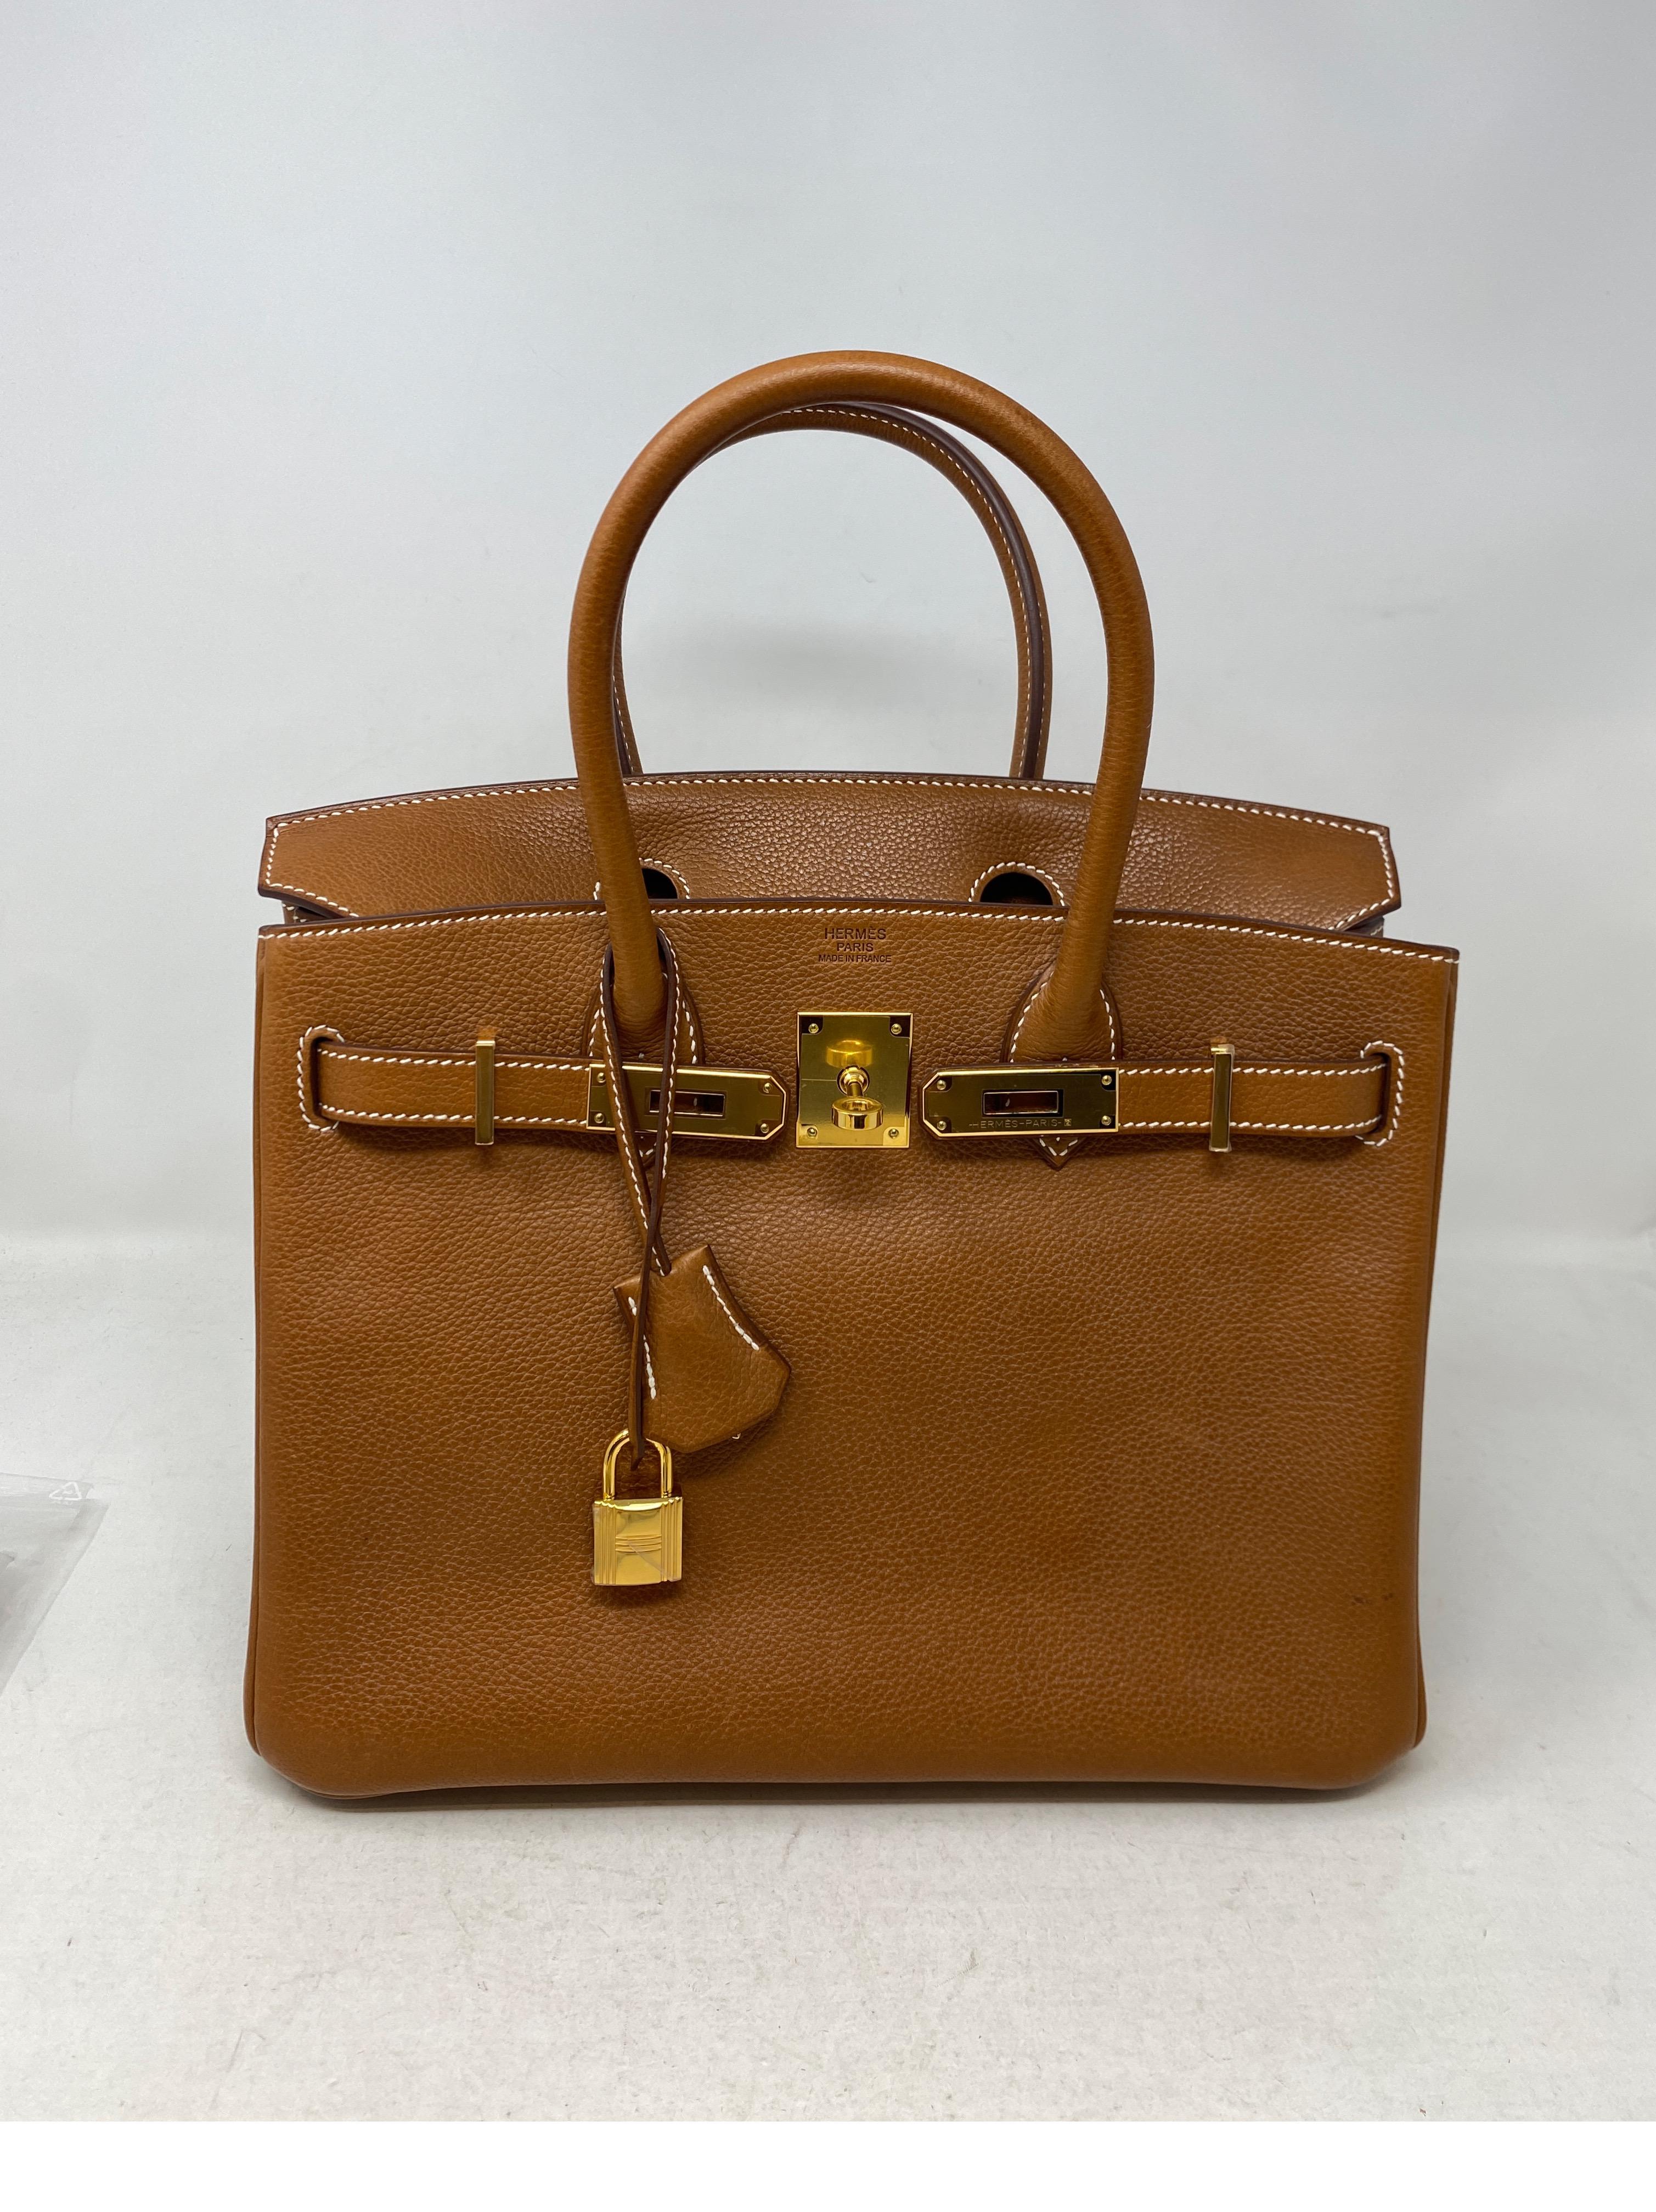 Hermes Gold Barenia Fauborg Birkin 30 Bag. Beautiful rare leather by Hermes. Has a gorgeous patina over time. This one has a few small spots of wear. Not noiticeable. Please see all photos. The bag is like new from 2019. Gold color leather and gold